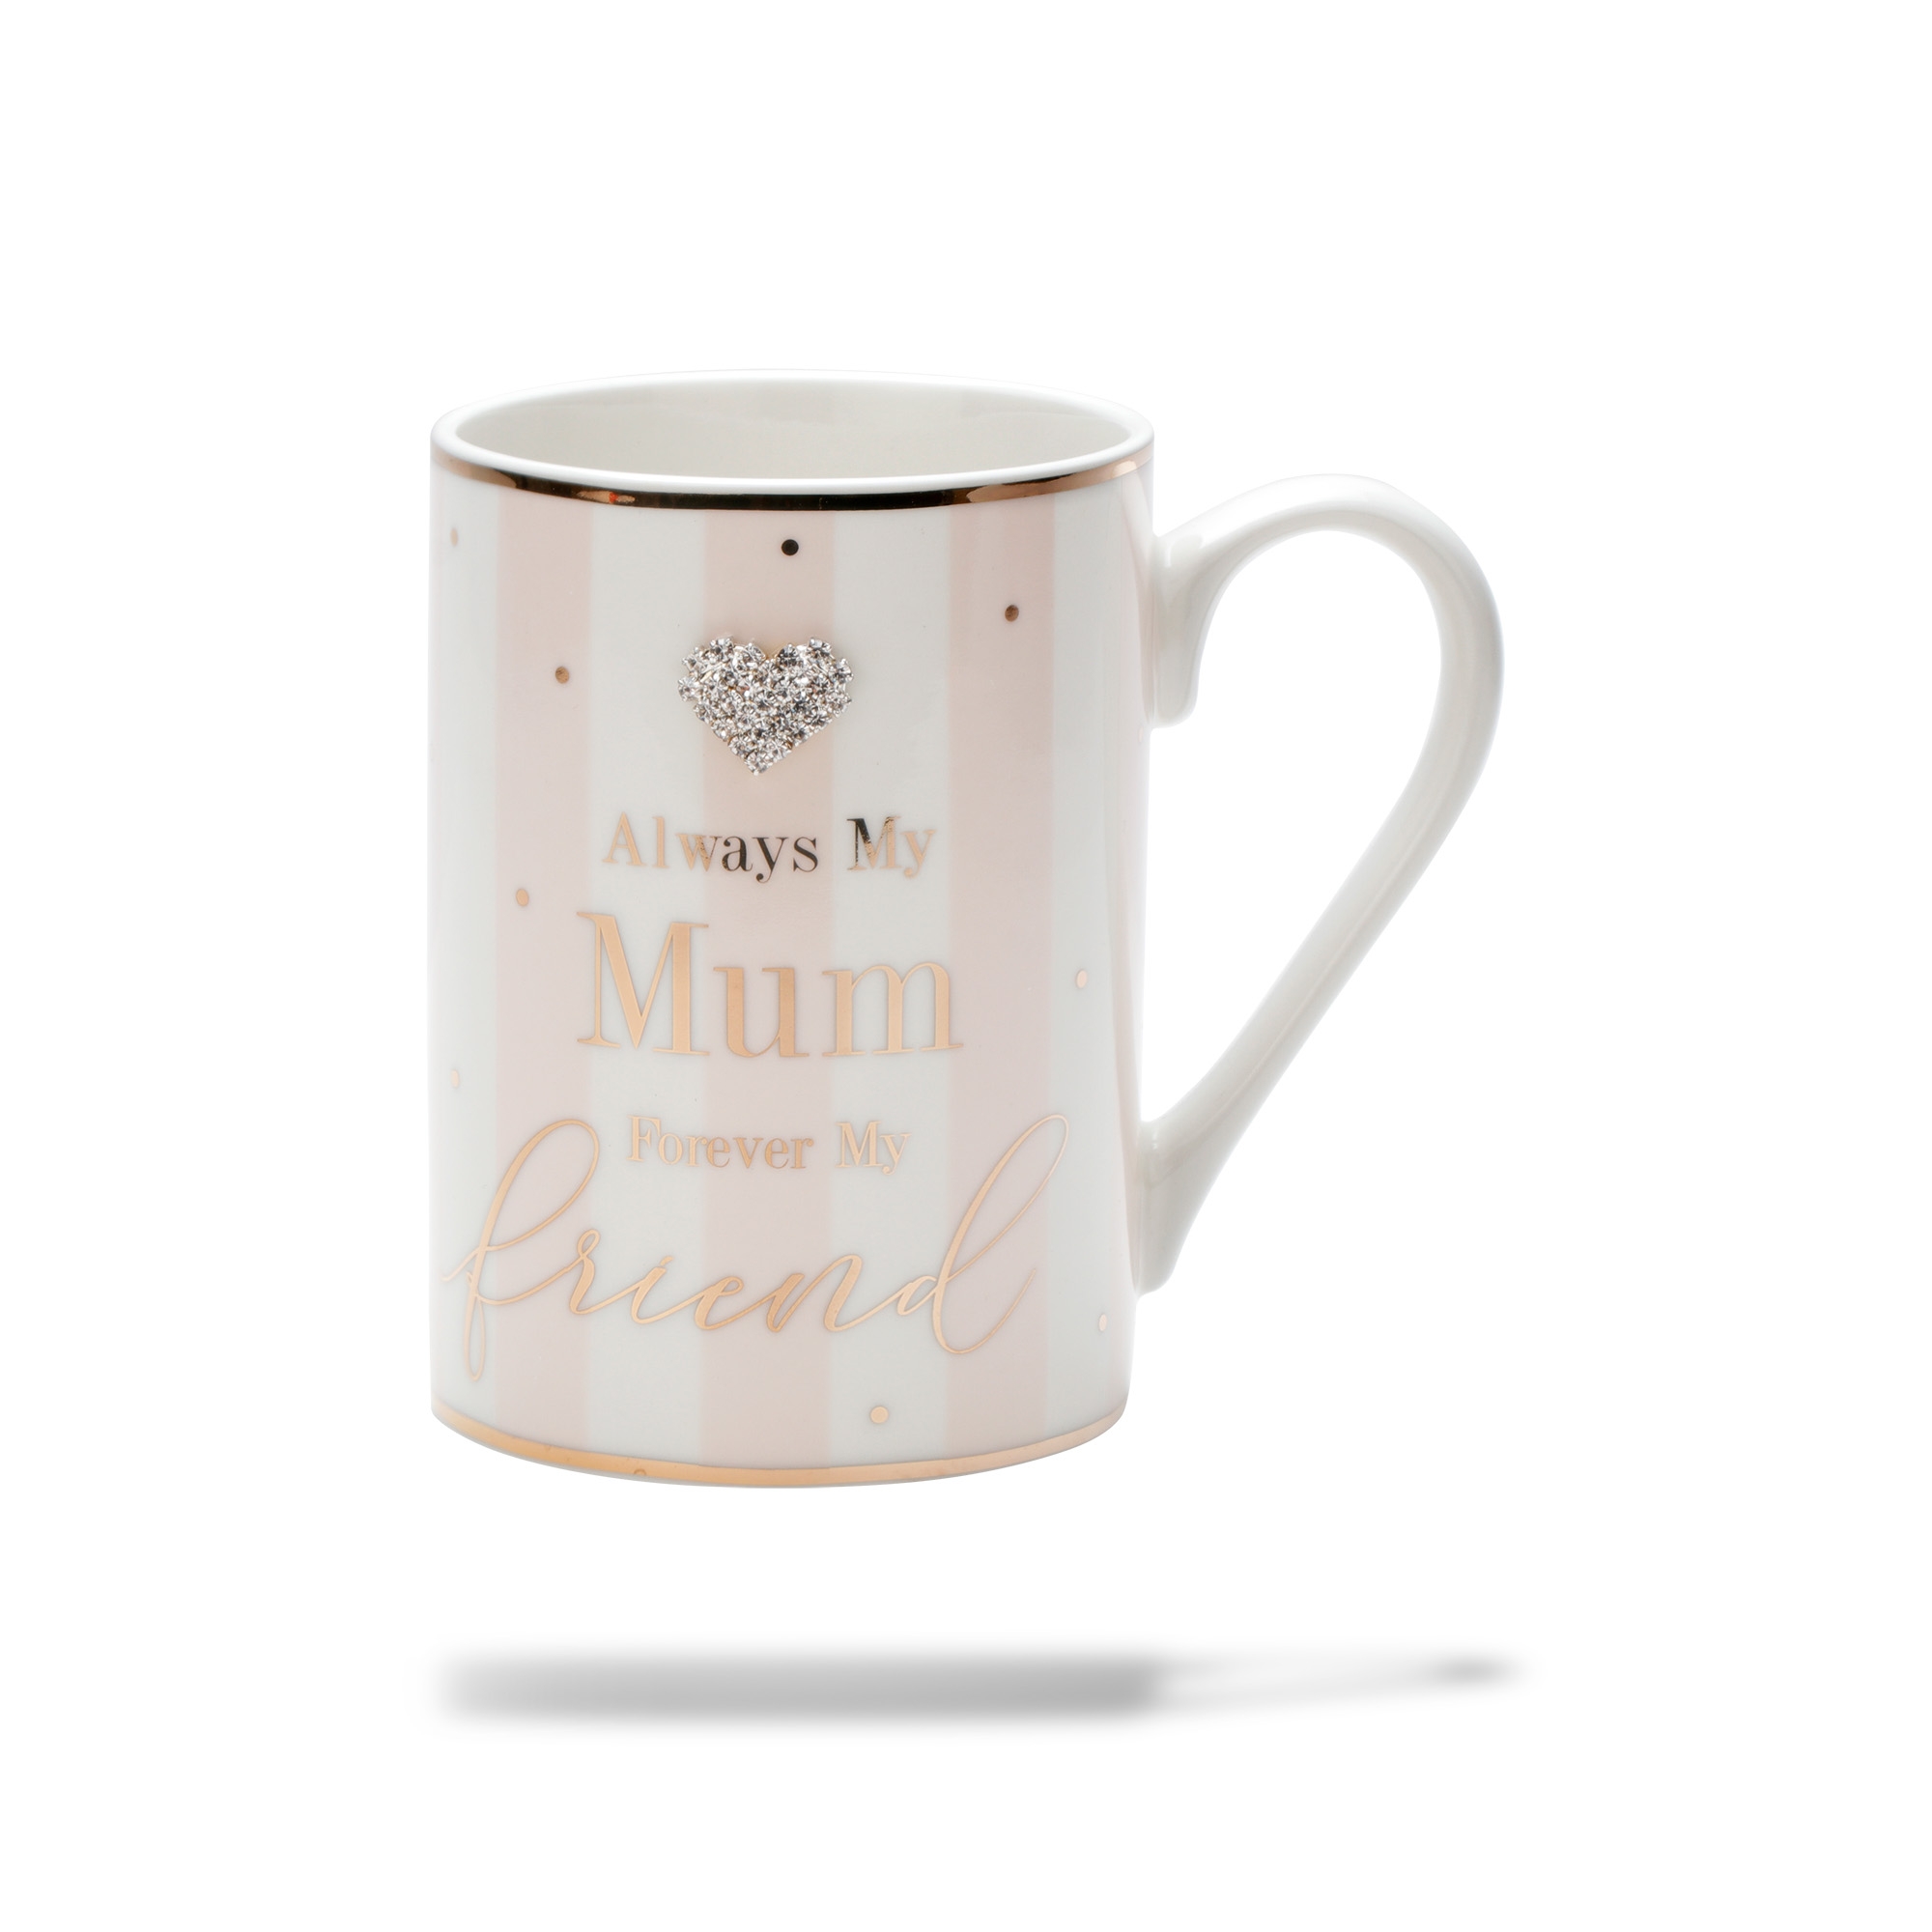 Archies | ARCHIES CERAMIC COFFEE MUG WITH ALWAYS MY MOM FOREVER MY FRIEND PRINTED 0